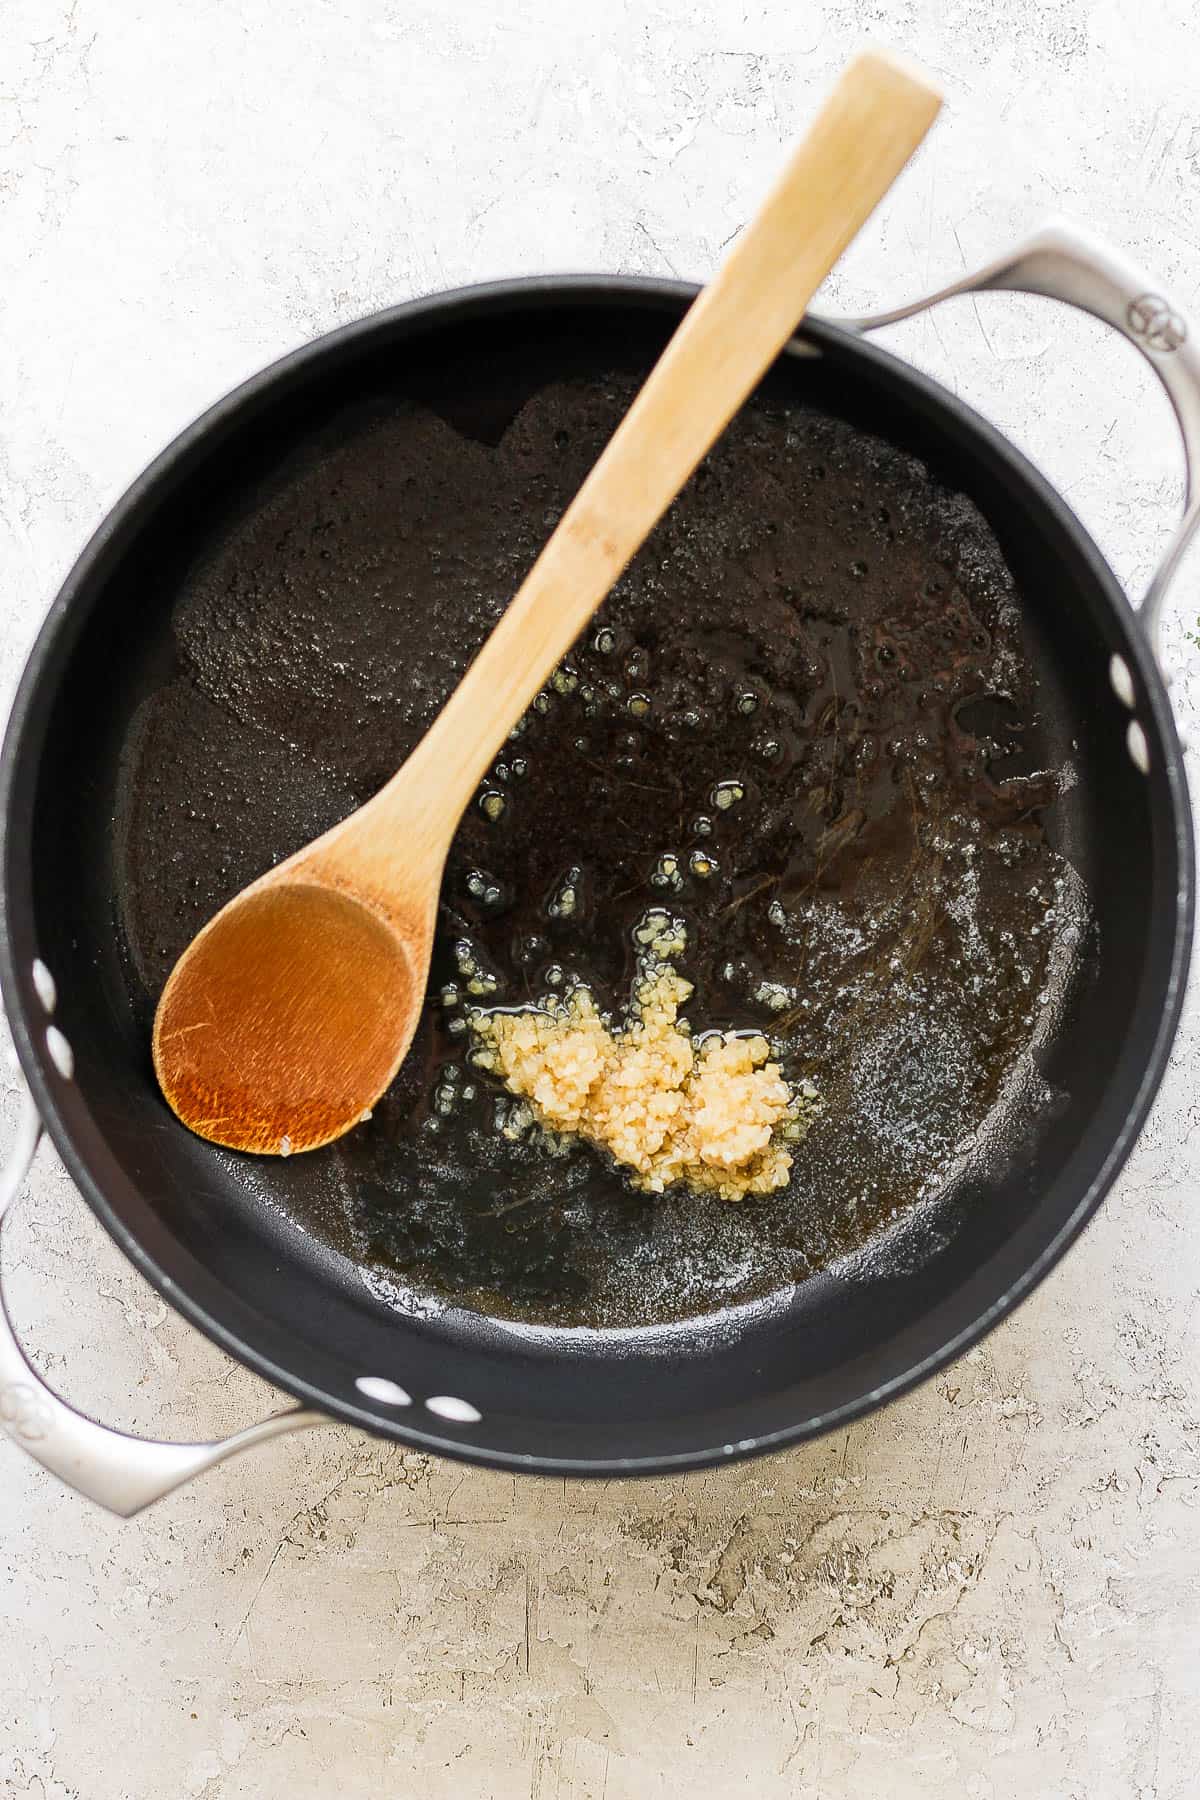 Garlic sautéing in melted butter in a large pot.